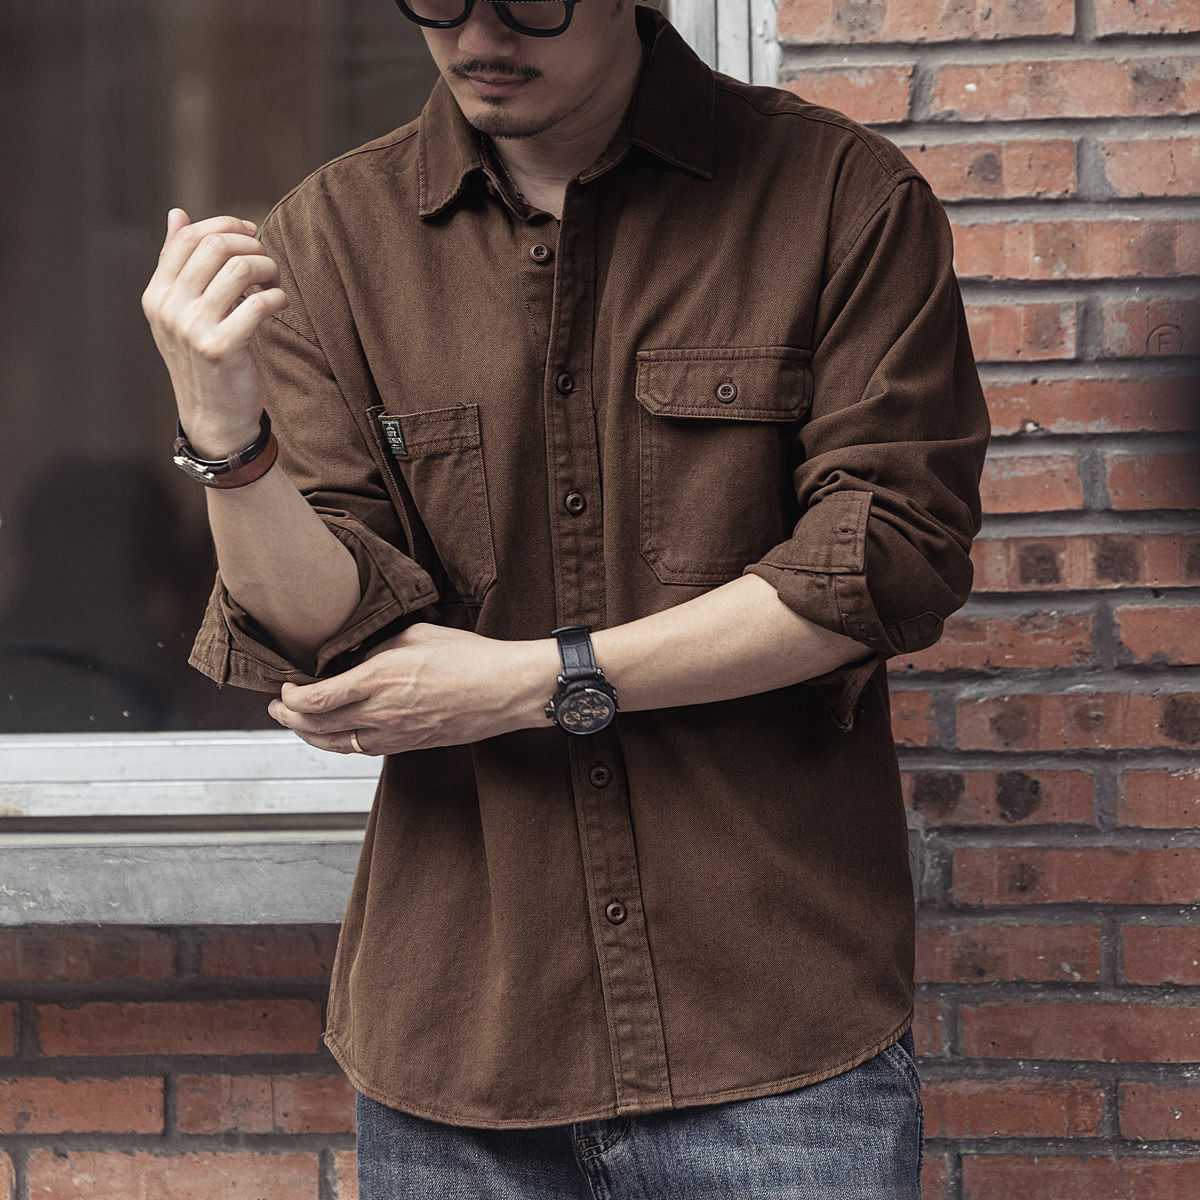 Spring and Autumn style American retro workwear long-sleeved shirt men's trendy brand pure cotton hunting suit loose casual vintage shirt jacket